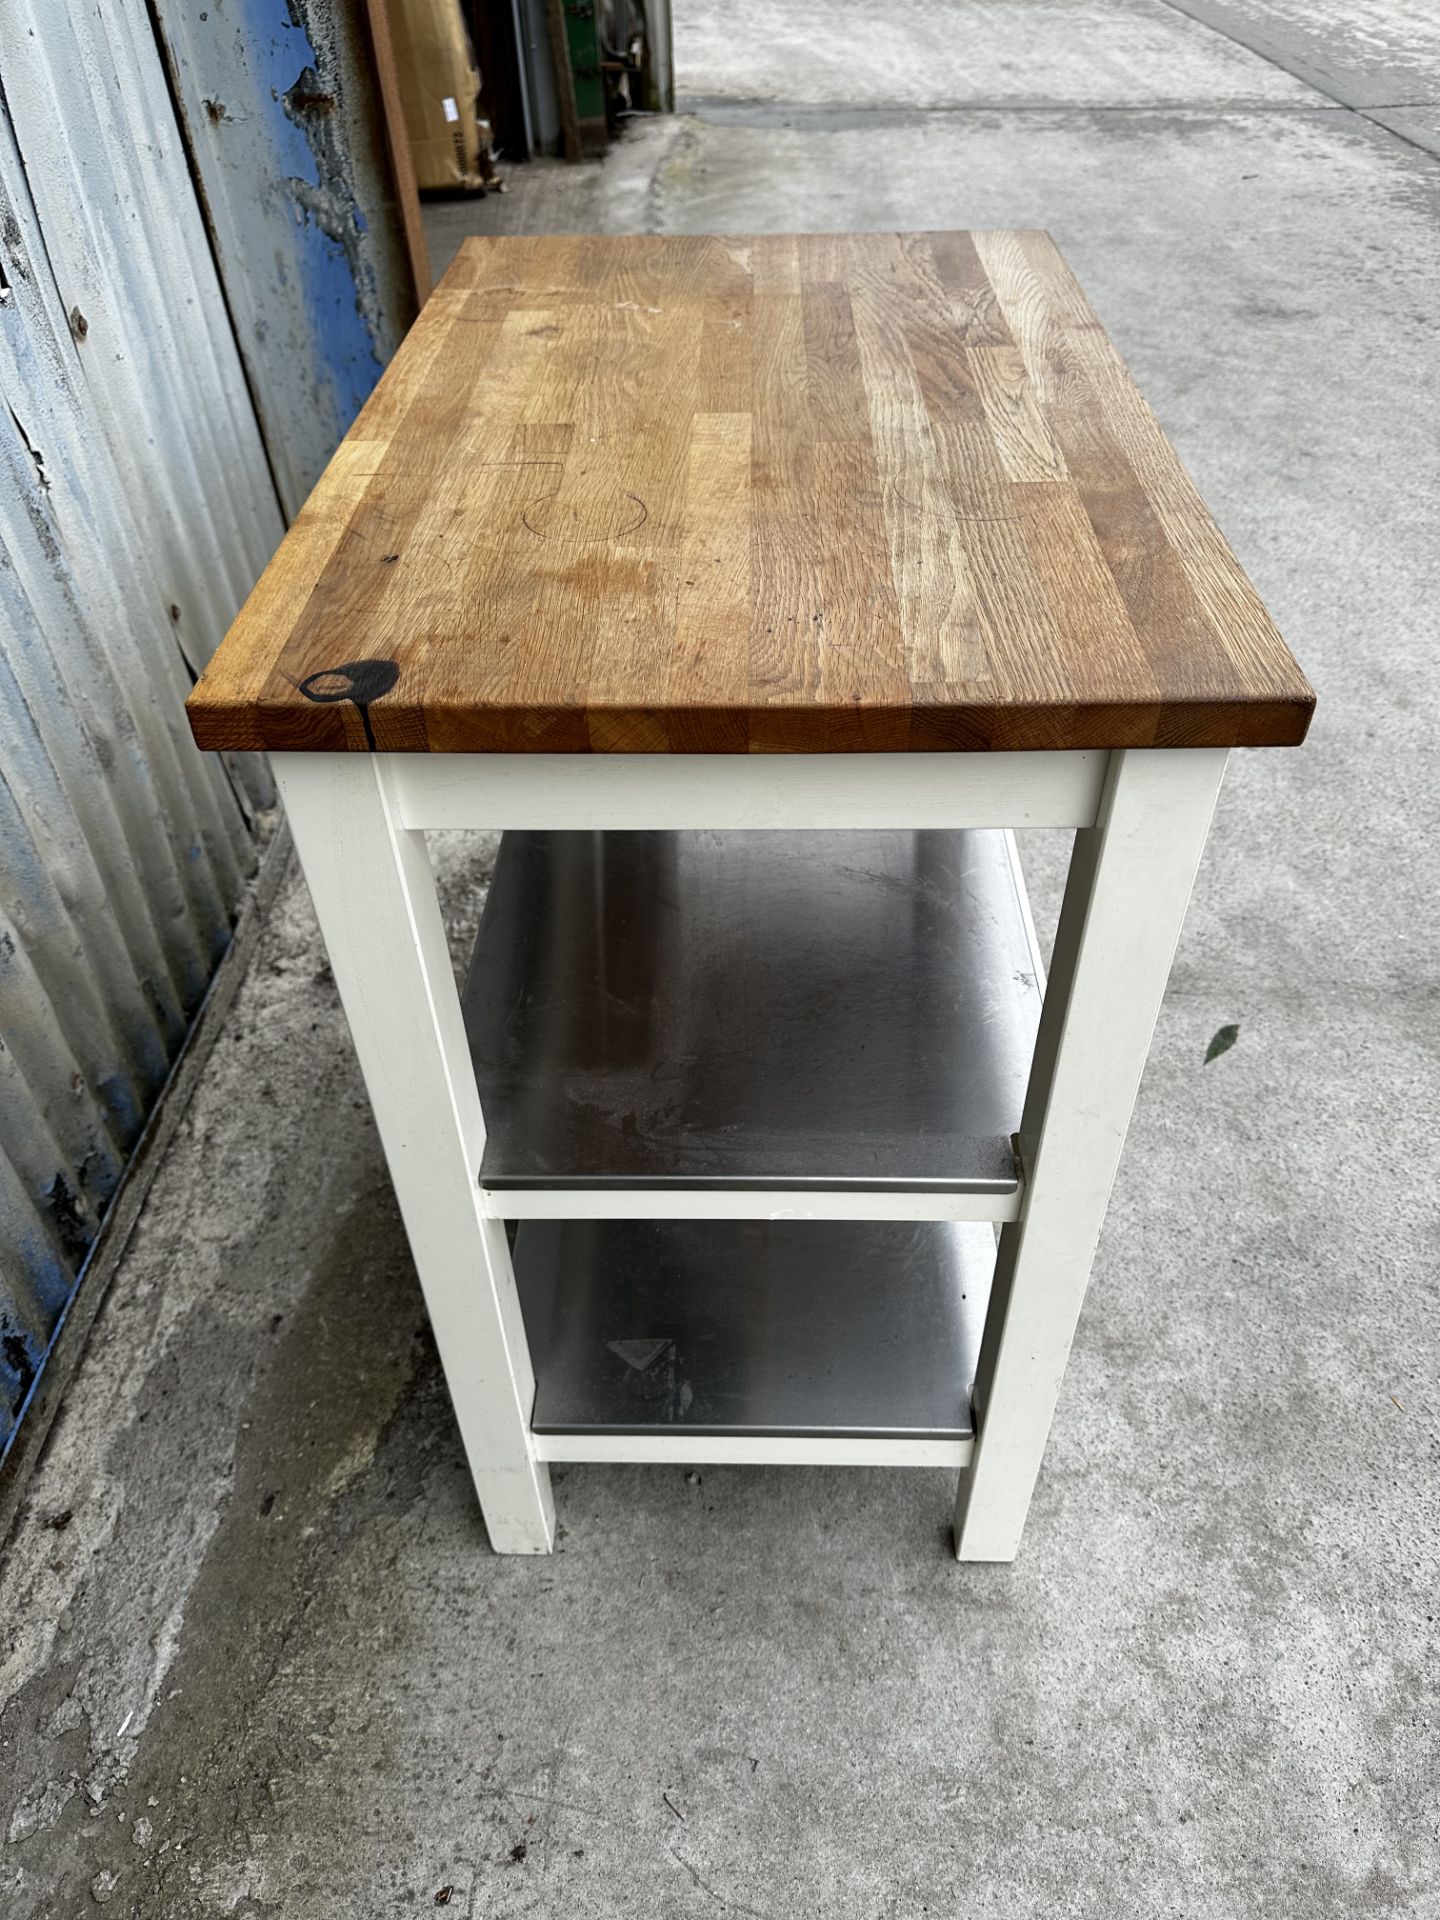 Kitchen Island Worktop With Wheels On One Side For Easy Use - Used - Image 2 of 2